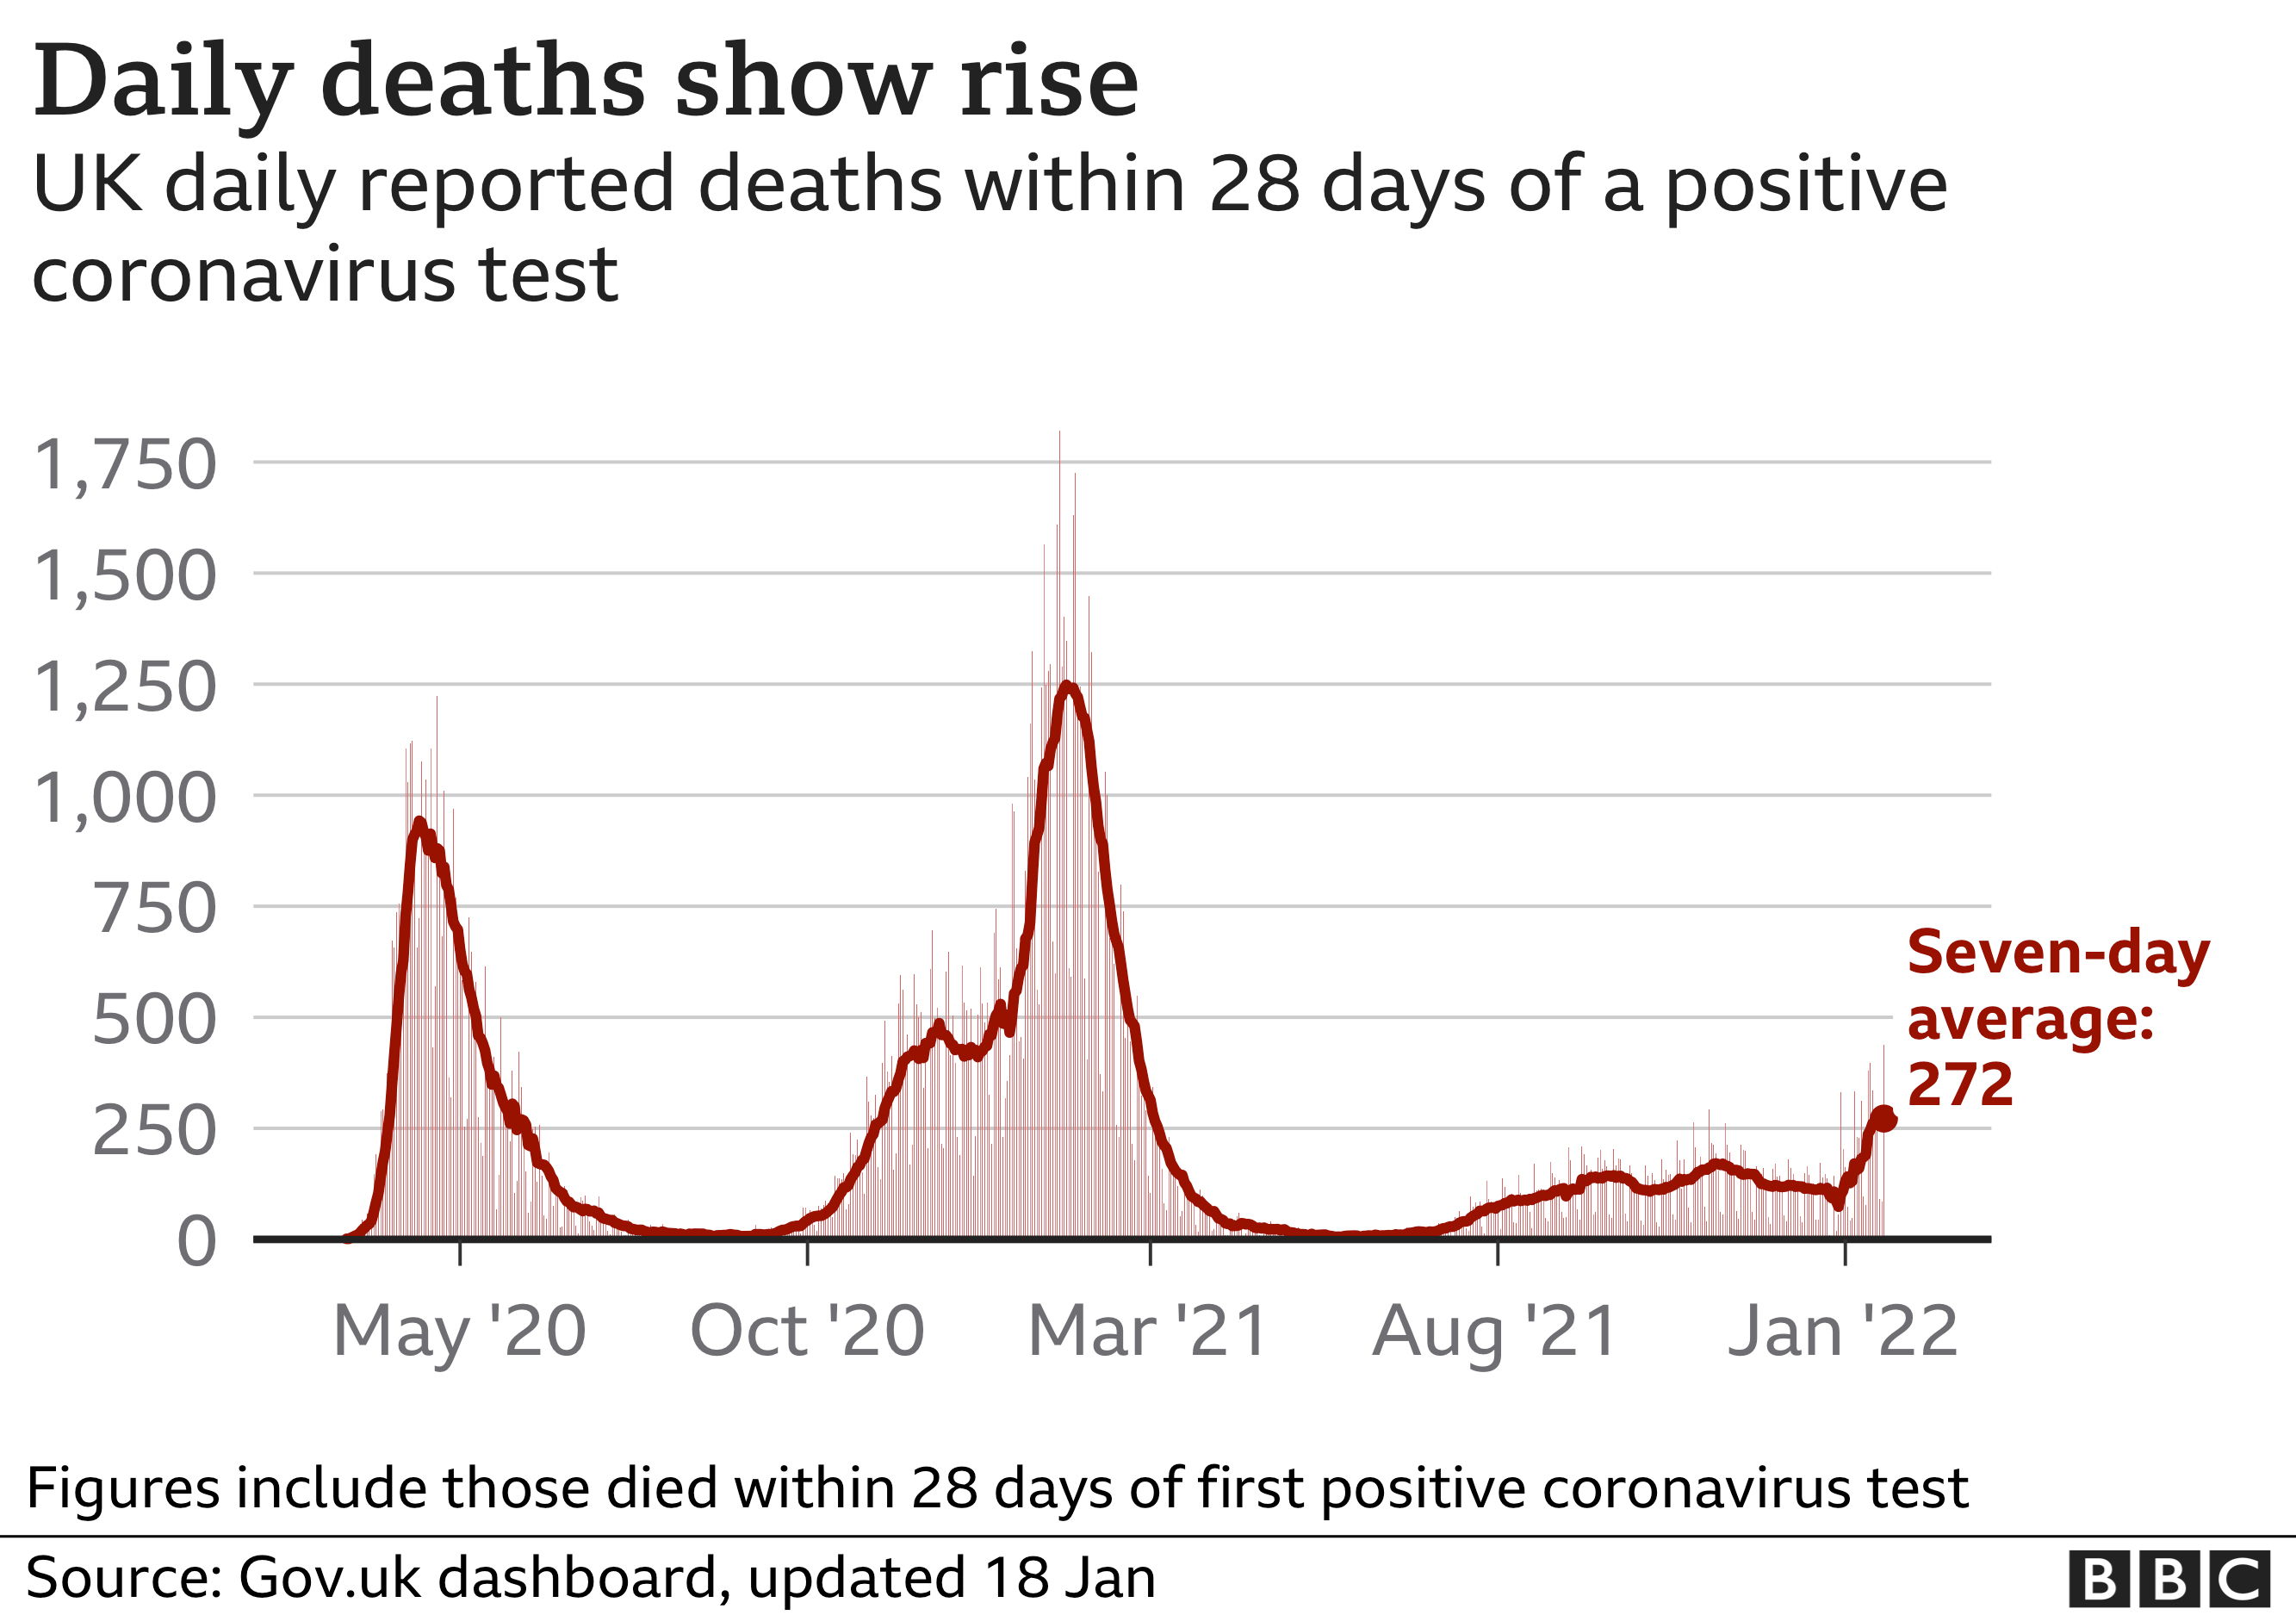 Chart showing that the number of daily deaths is rising